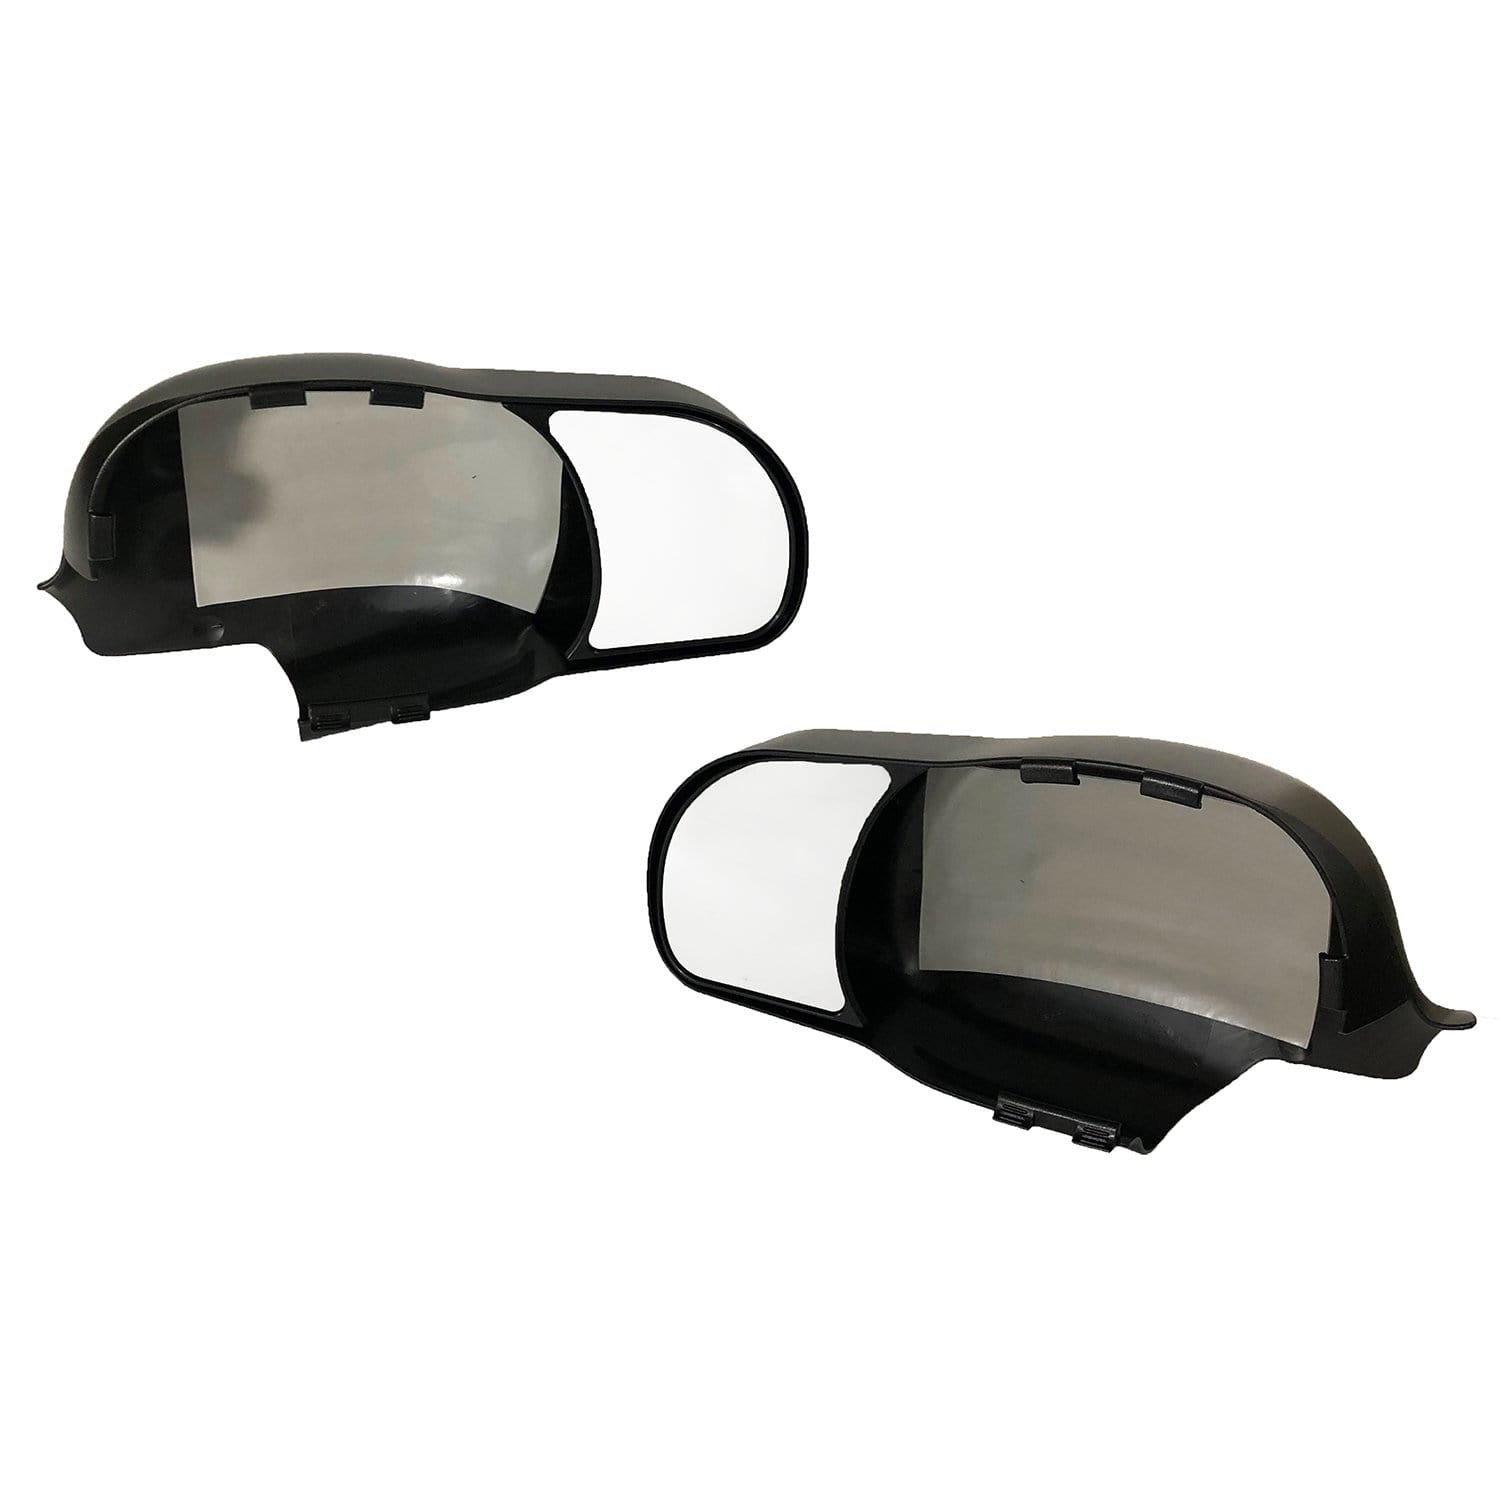 K-Source Fit System 81600 Ford F-150/F-250 Towing Mirror - Pair, Black